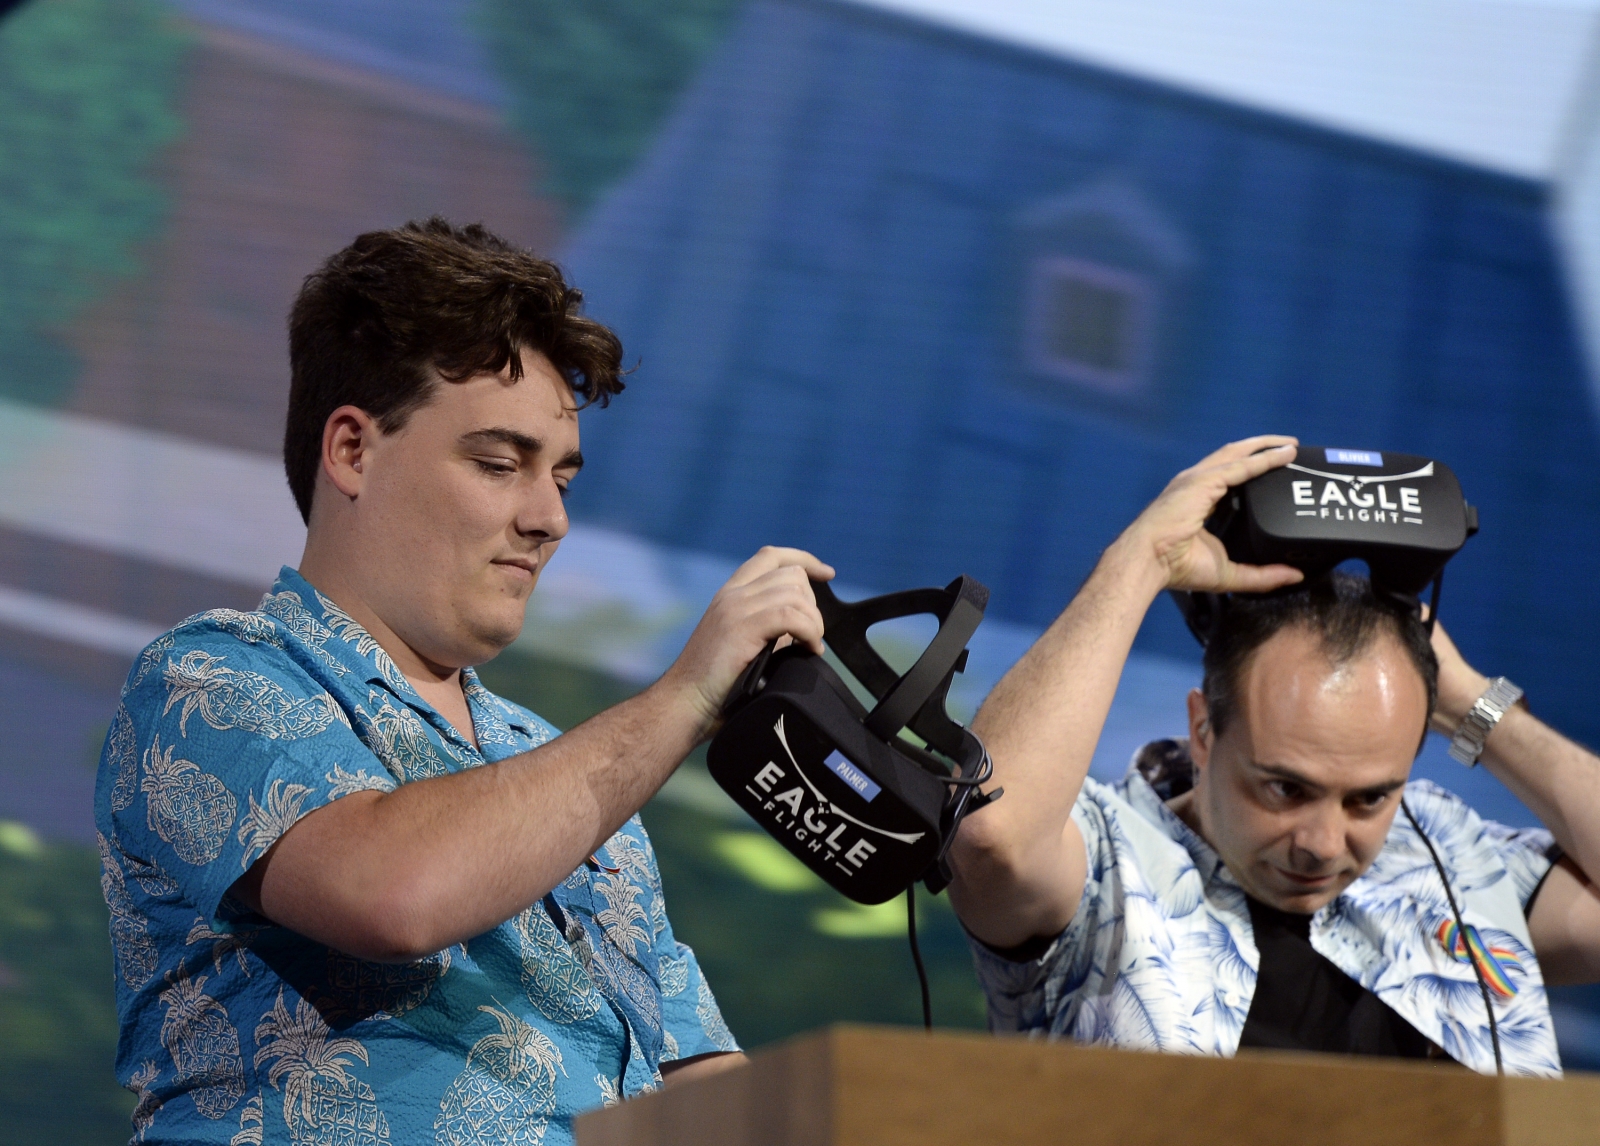 Oculus founder Palmer Luckey working on defence startup to help Trump